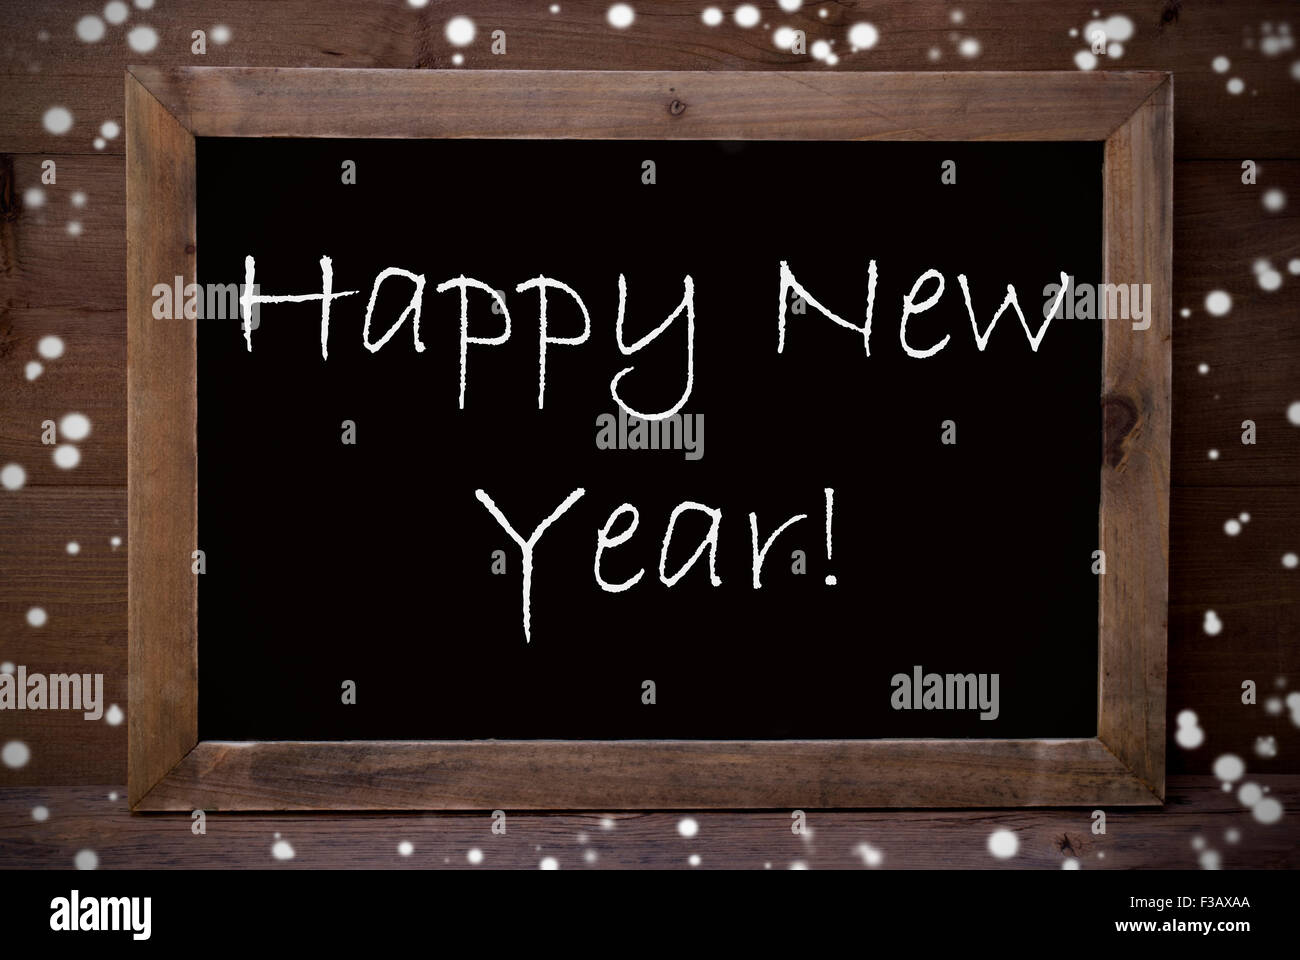 Brown Blackboard With English Text Happy New Year As Greeting Card. Wooden Background. Vintage Rustic Style. Snowflakes Symboliz Stock Photo